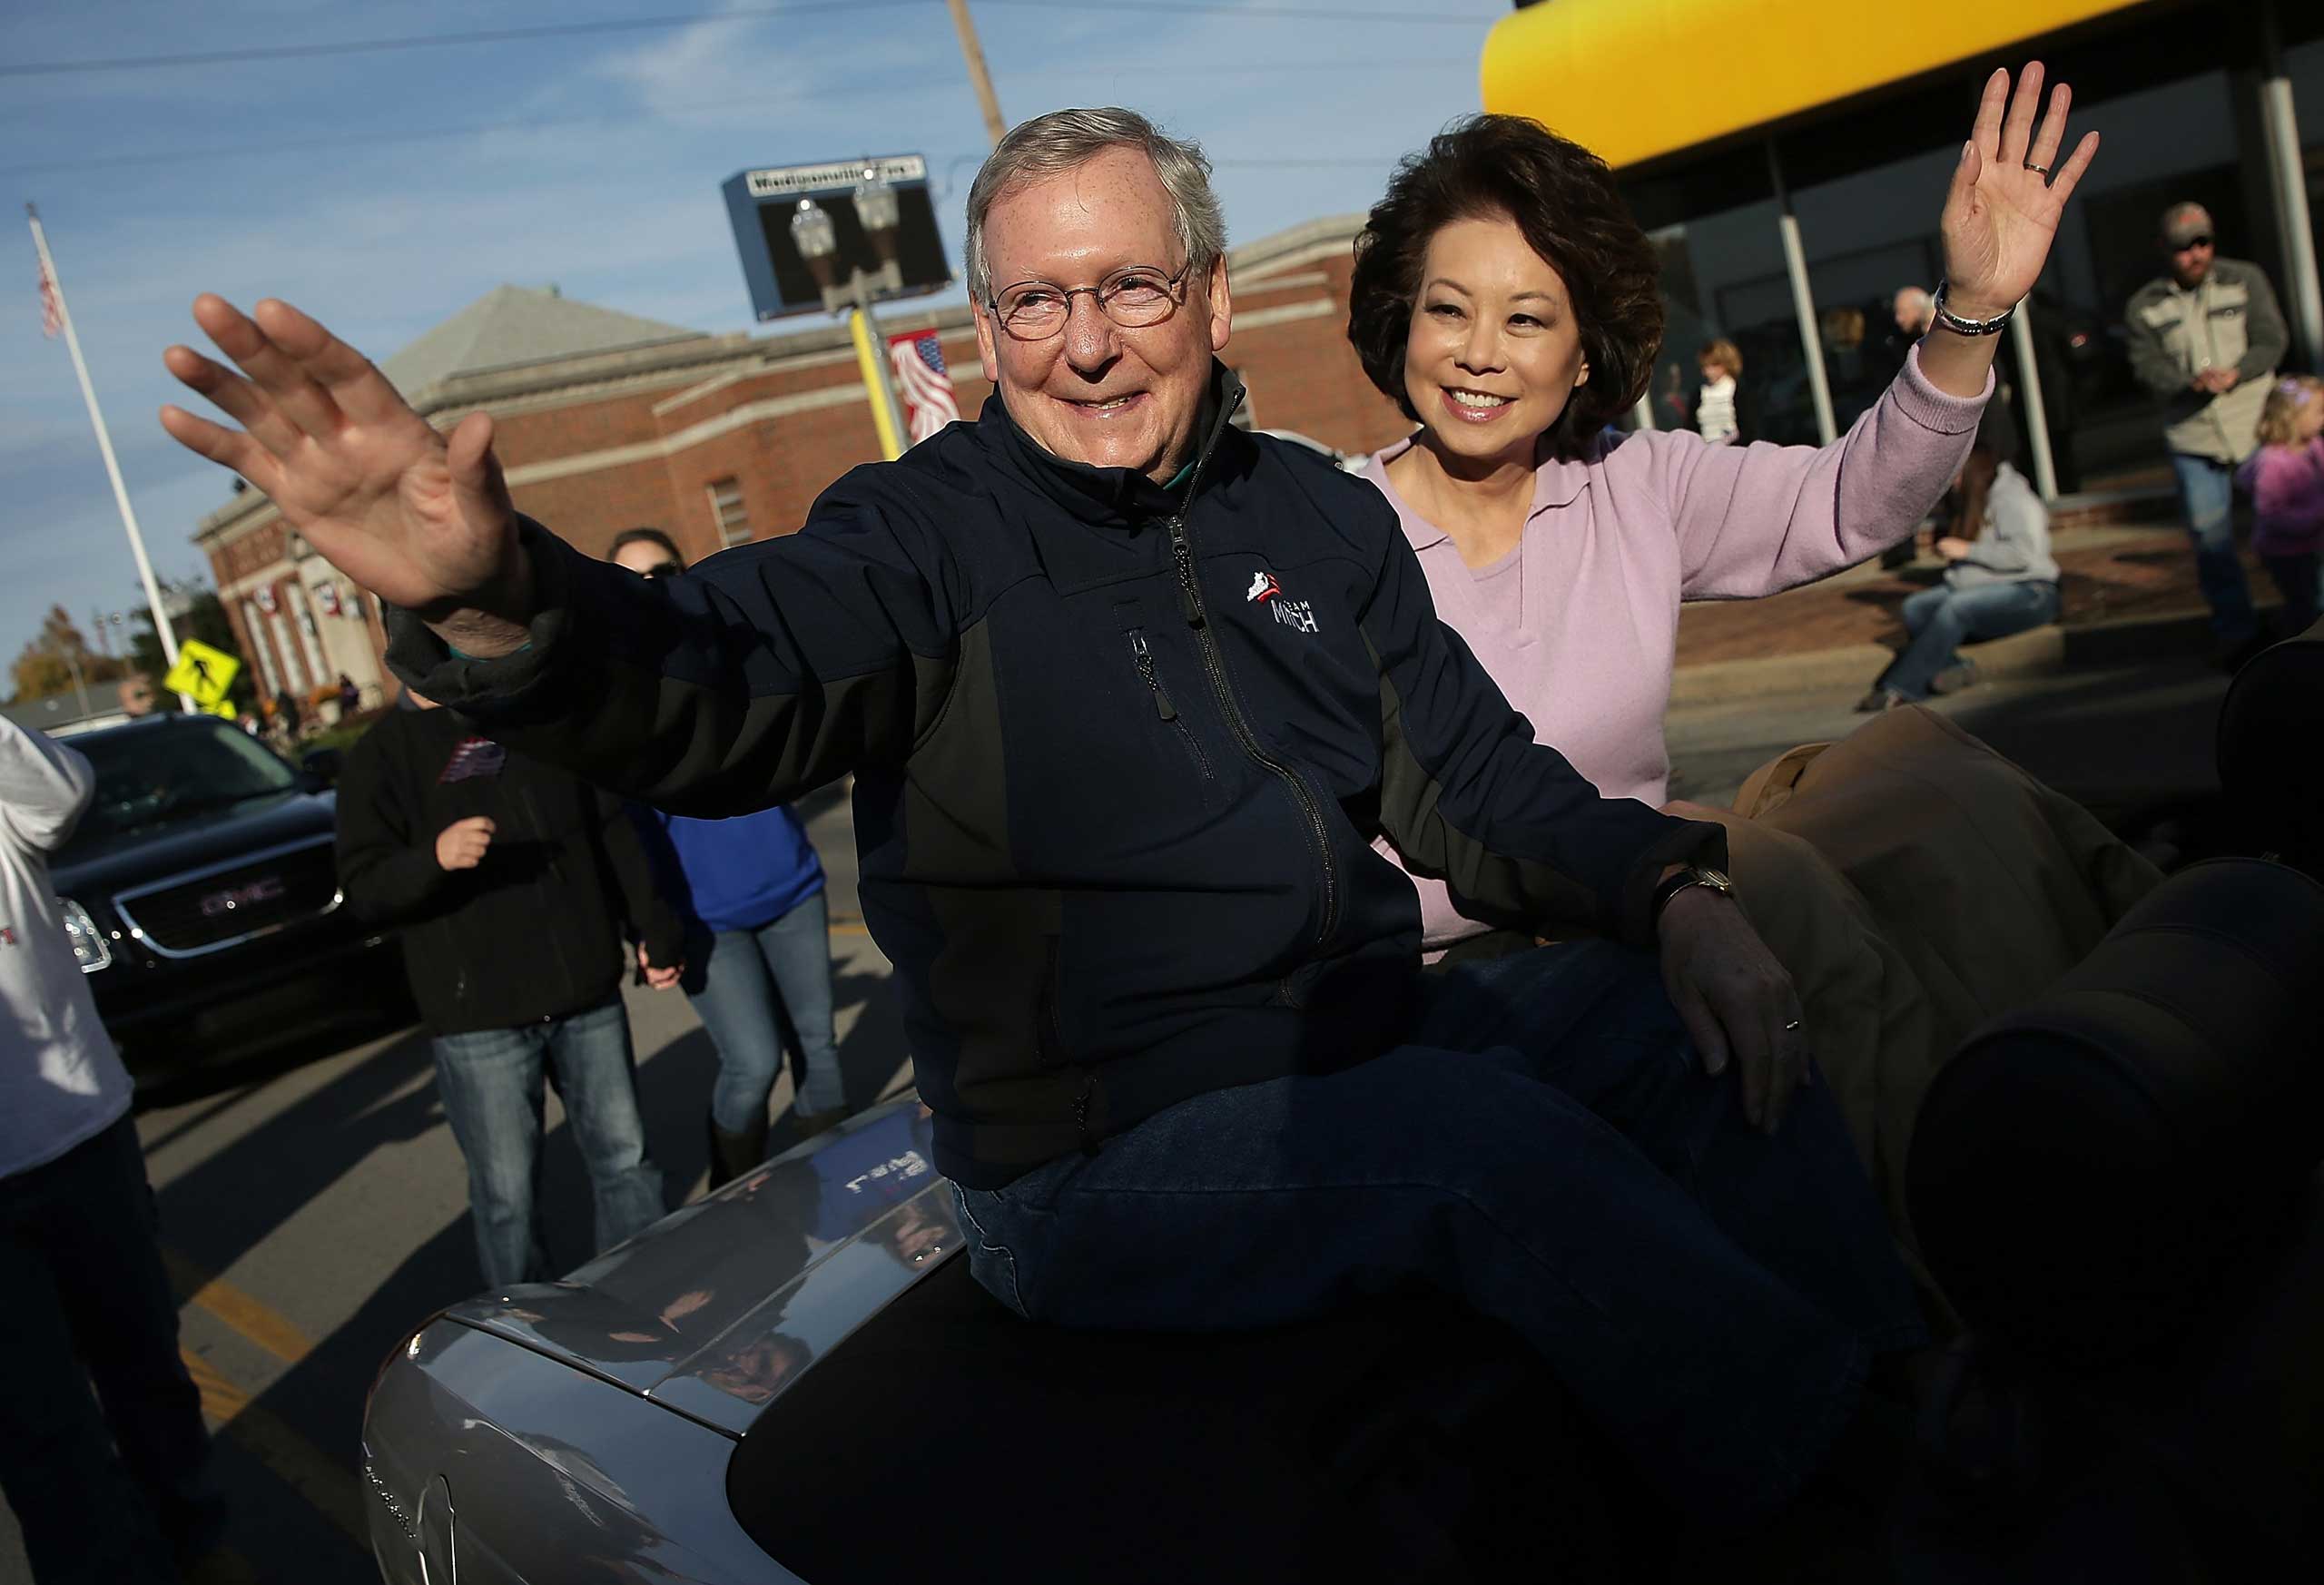 Senate Minority Leader Mitch McConnell (R-KY) waves while riding with his wife Elaine Chao (R) in the Hopkins Country Veterans Day Parade on November 2, 2014 in Madisonville, Ky. (Win McNamee—Getty Images)